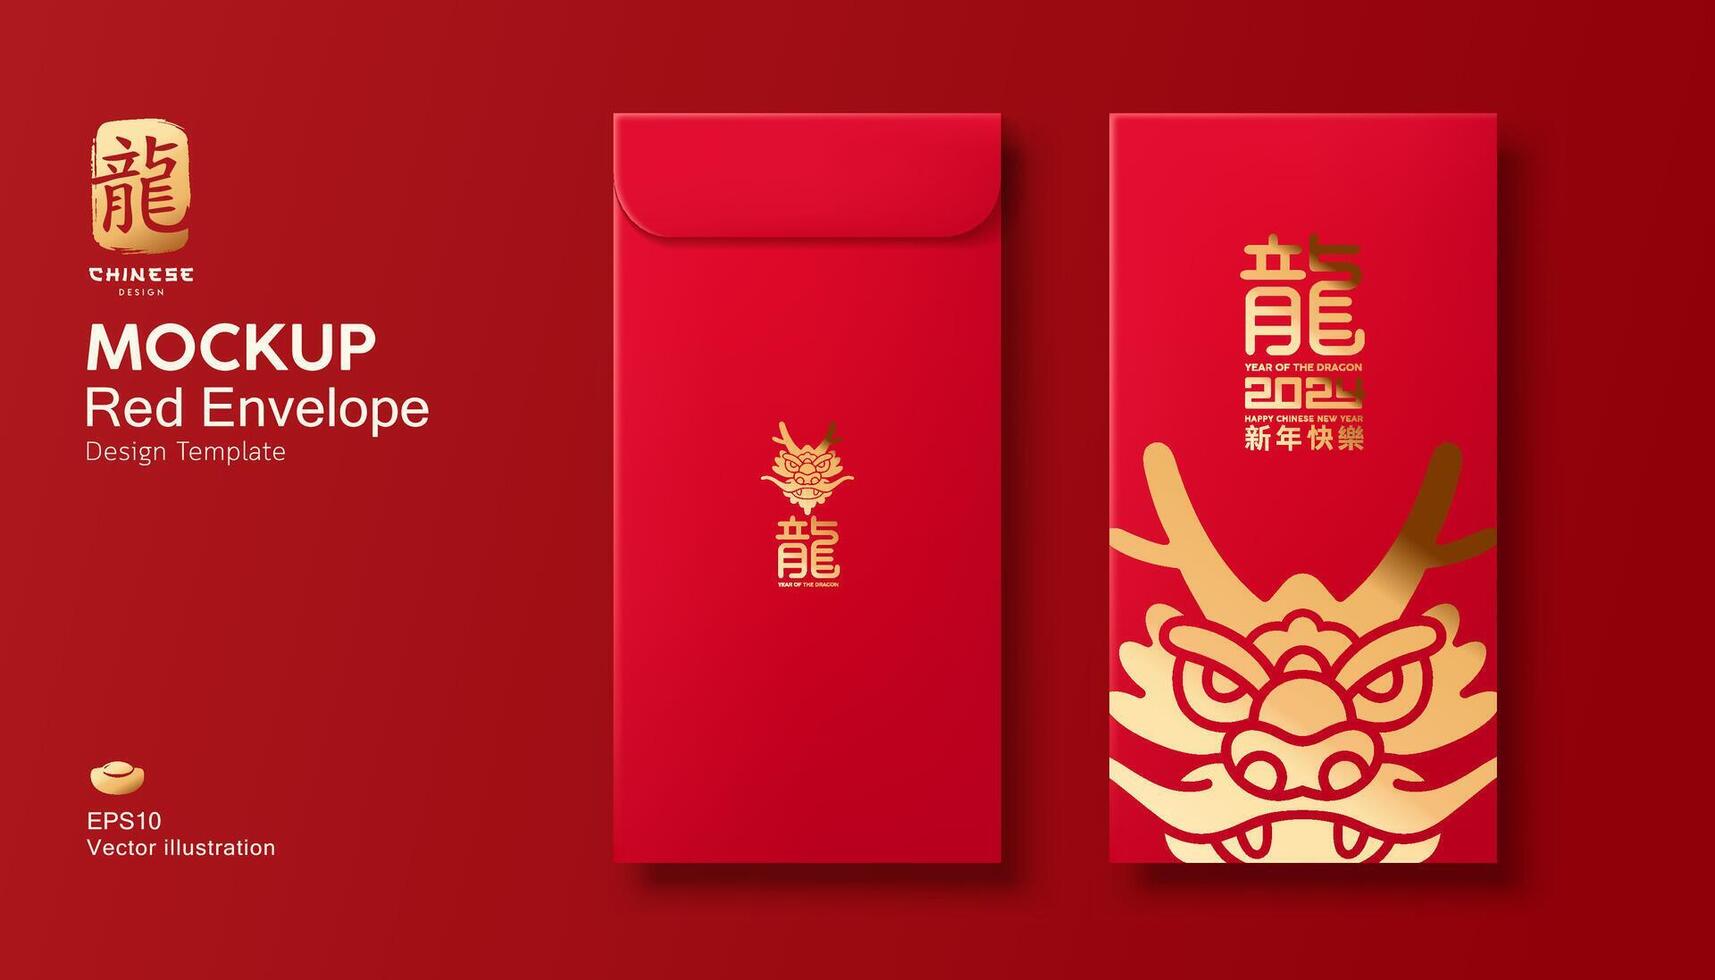 Red Envelope mock up, Ang pao Chinese new year, year of the dragon gold design, Characters Translation Dragon and Happy new year, on red background, EPS10 Vector illustration.